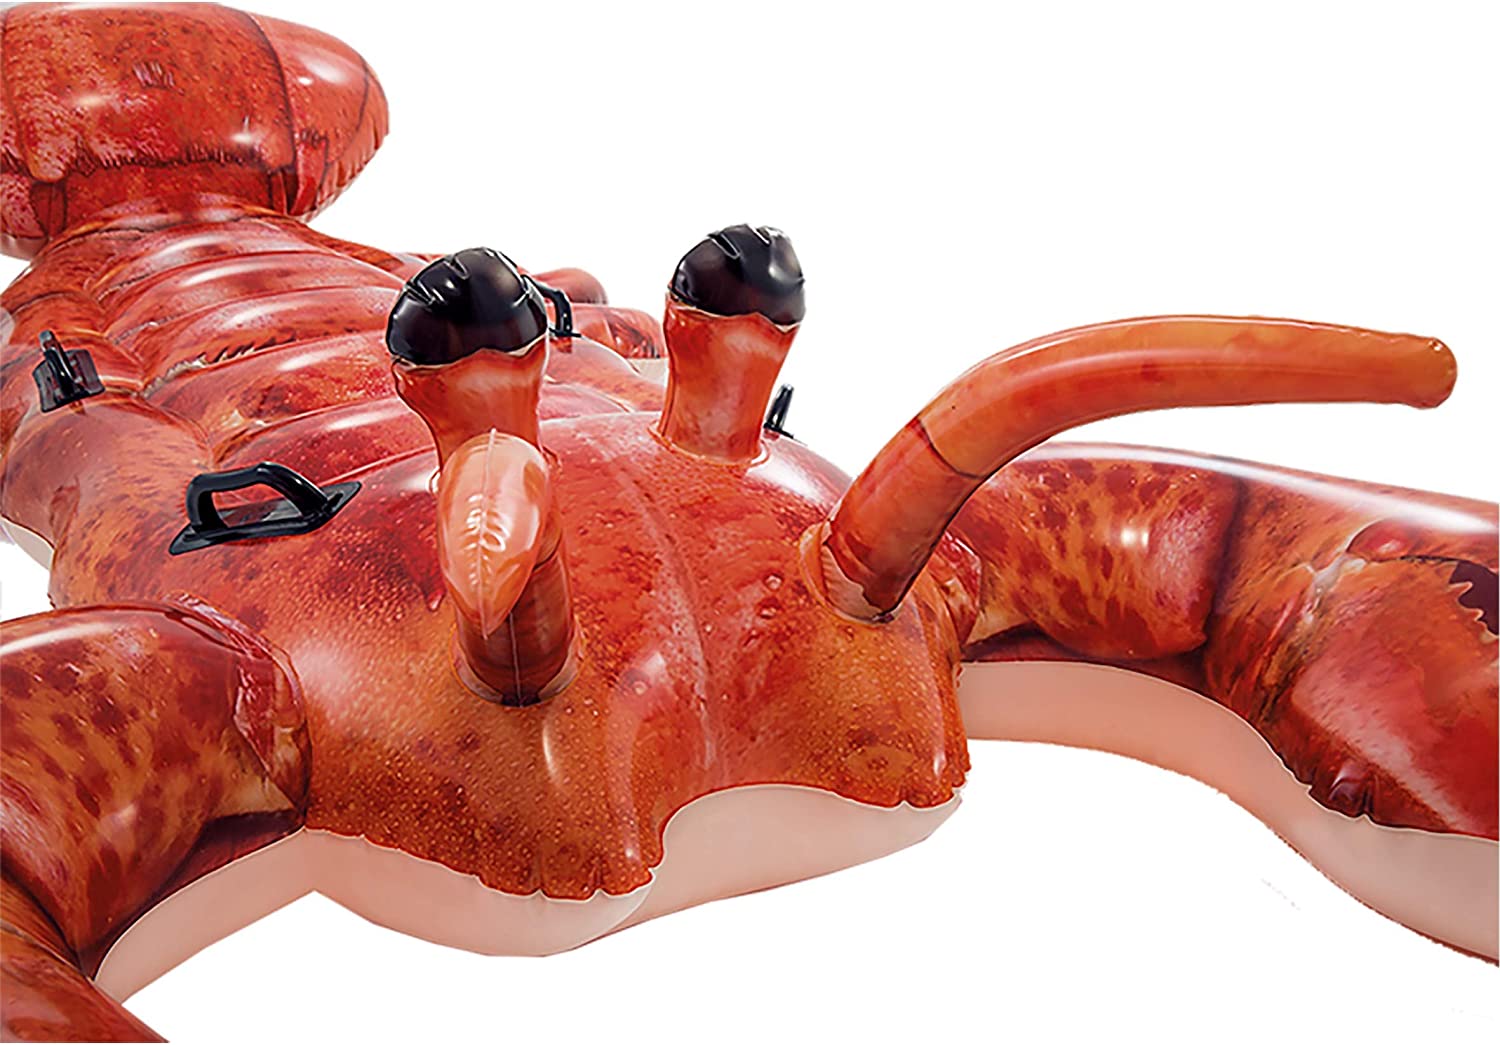 Lobster shaped float, Red